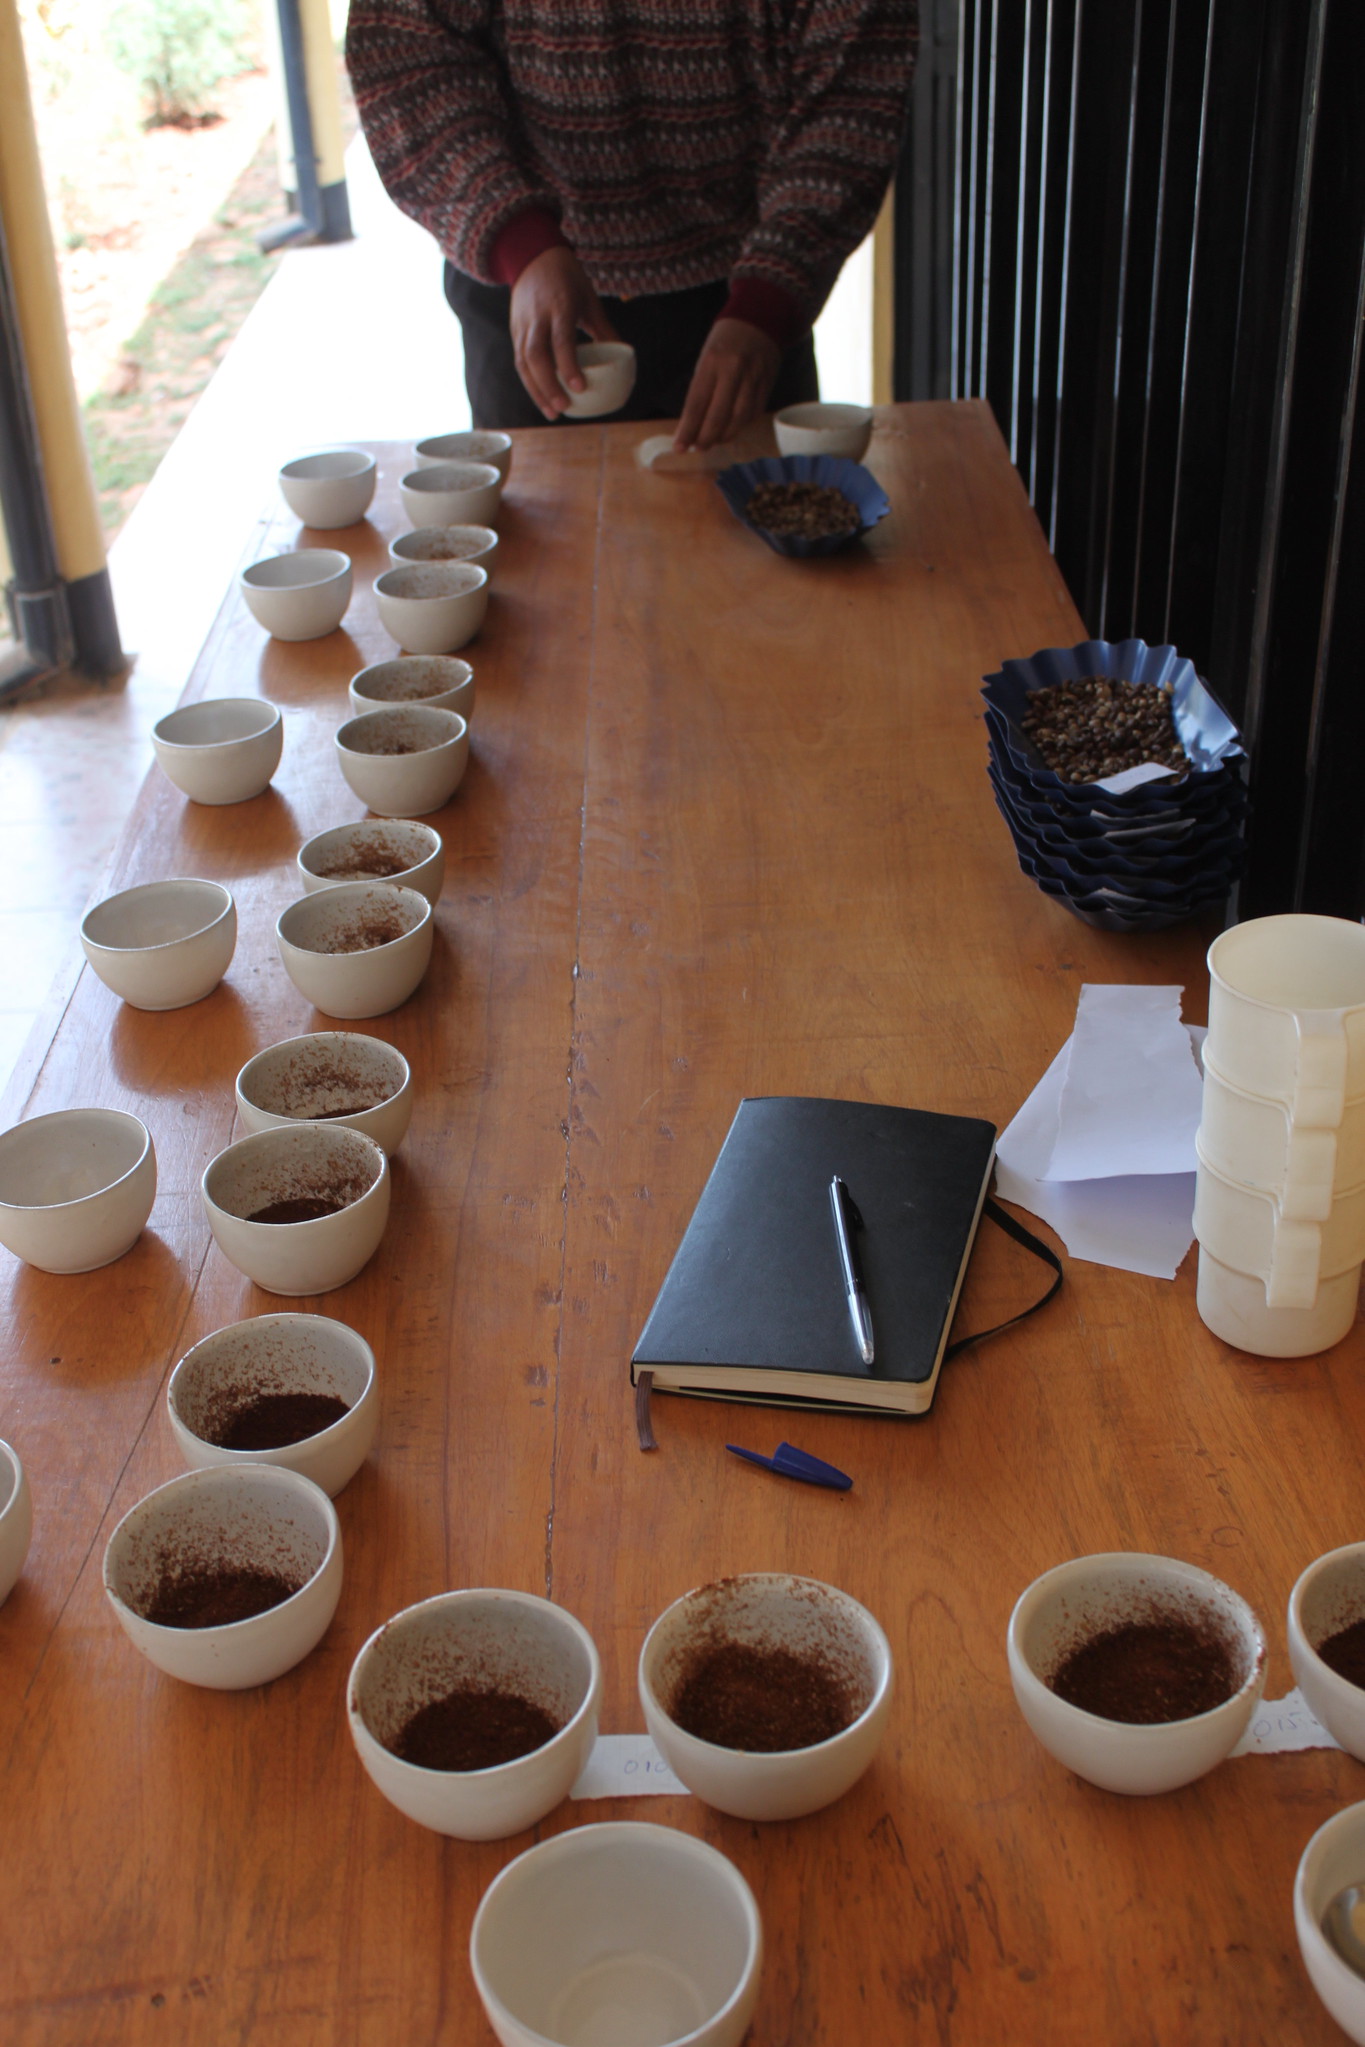 cupping samples